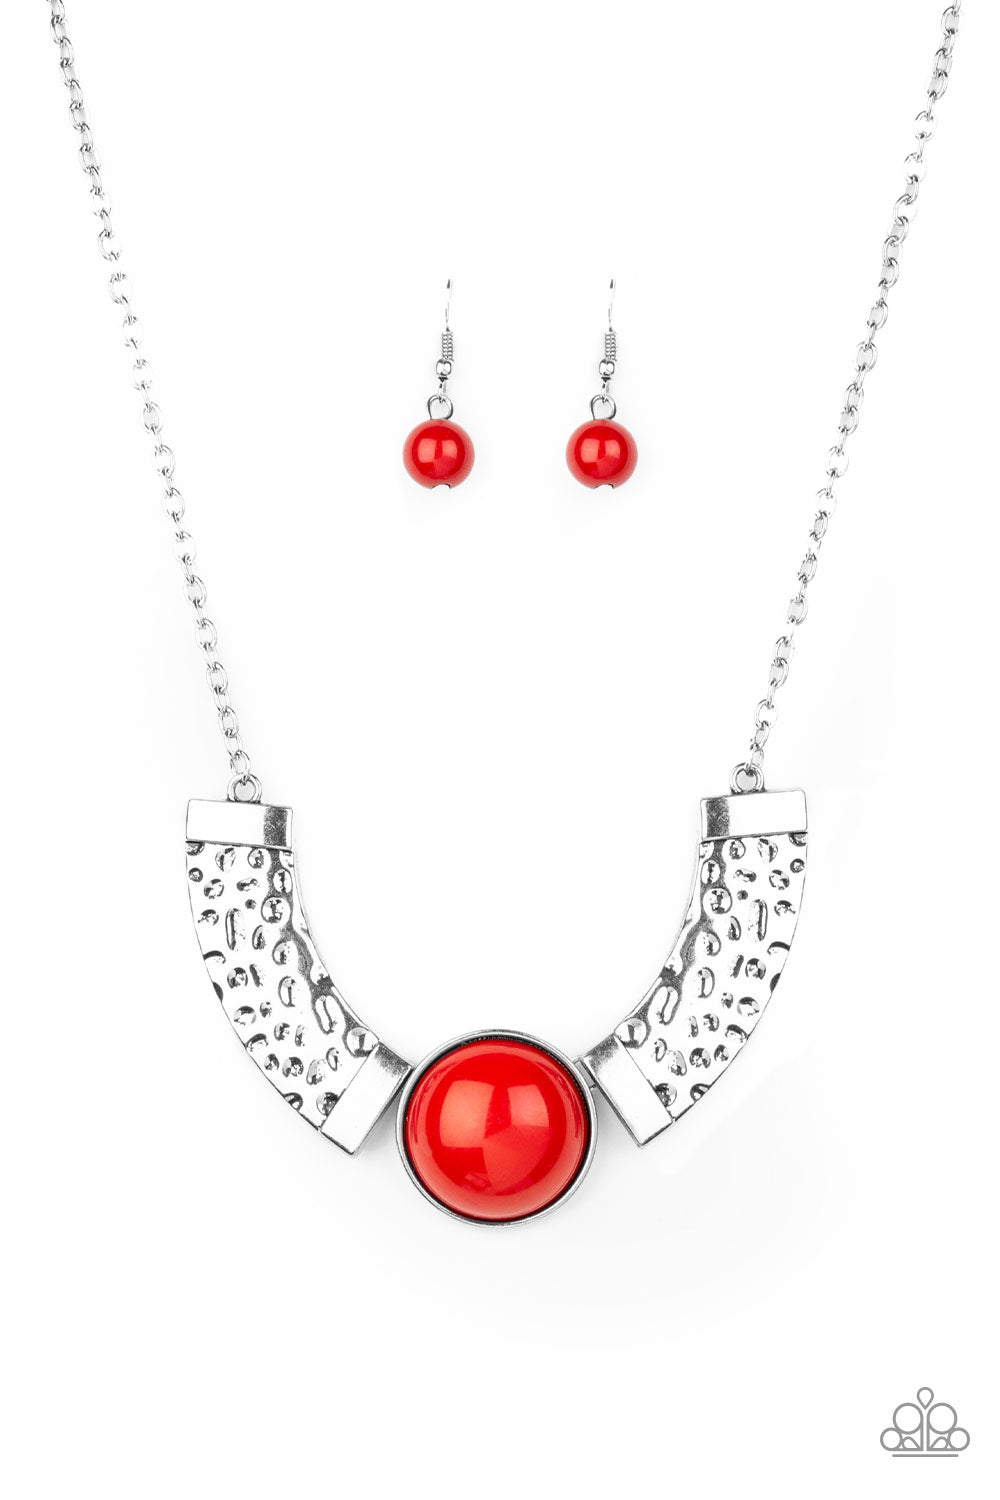 Egyptian Spell - Red Necklace Set - Princess Glam Shop